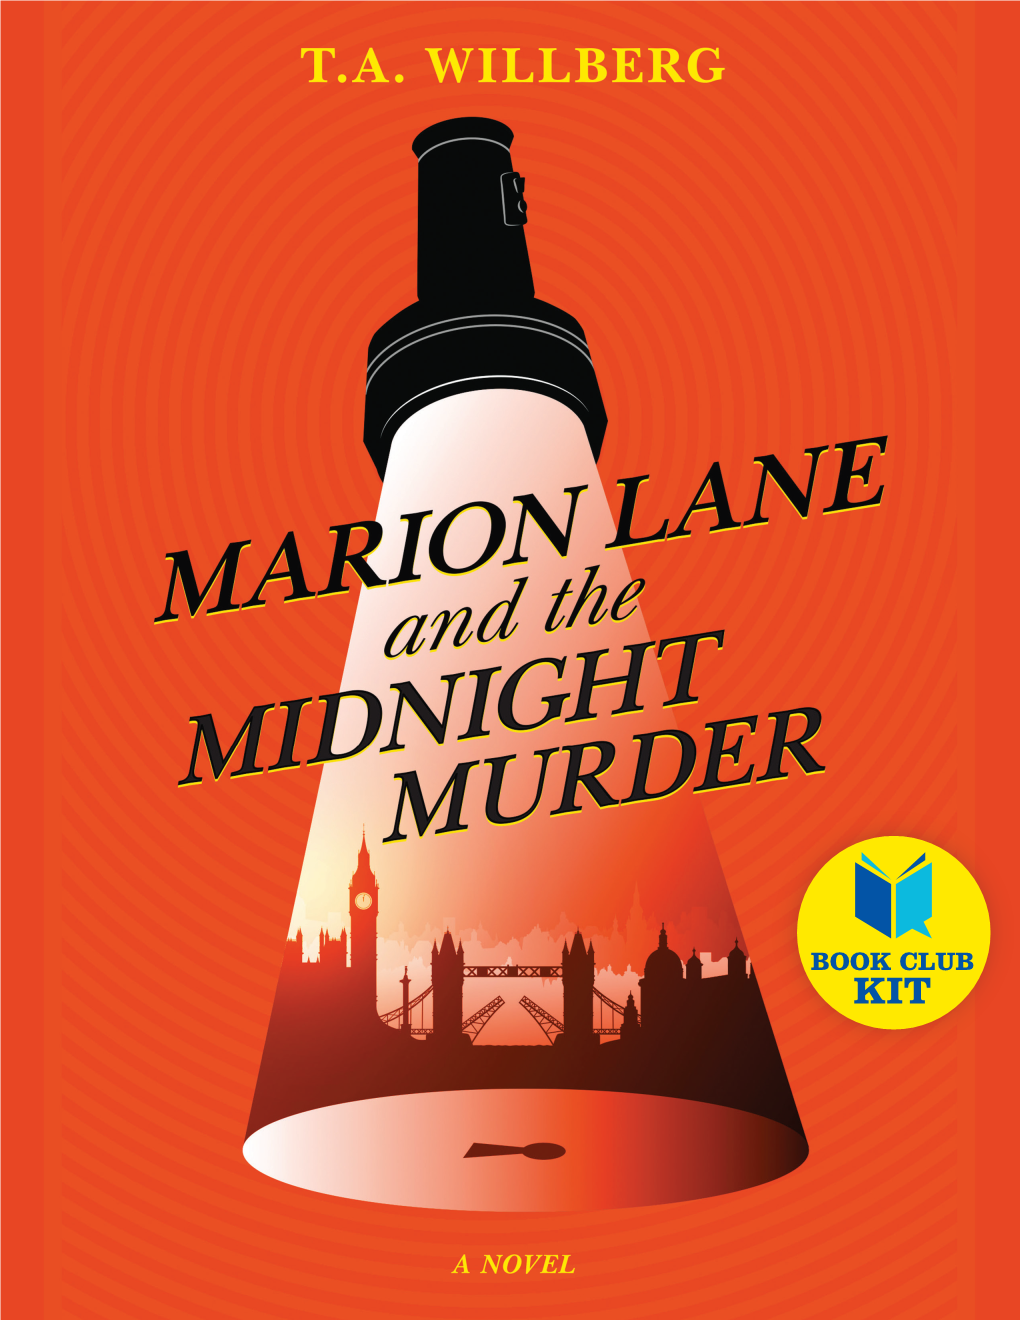 1580 MARION LANE and the MIDNIGHT MURDER Book Club Kit/2—RH:Mm—Sep.­­ 14/20 Behind the Book a Real Miss Brickett’S? the Secrets of Subterranean London